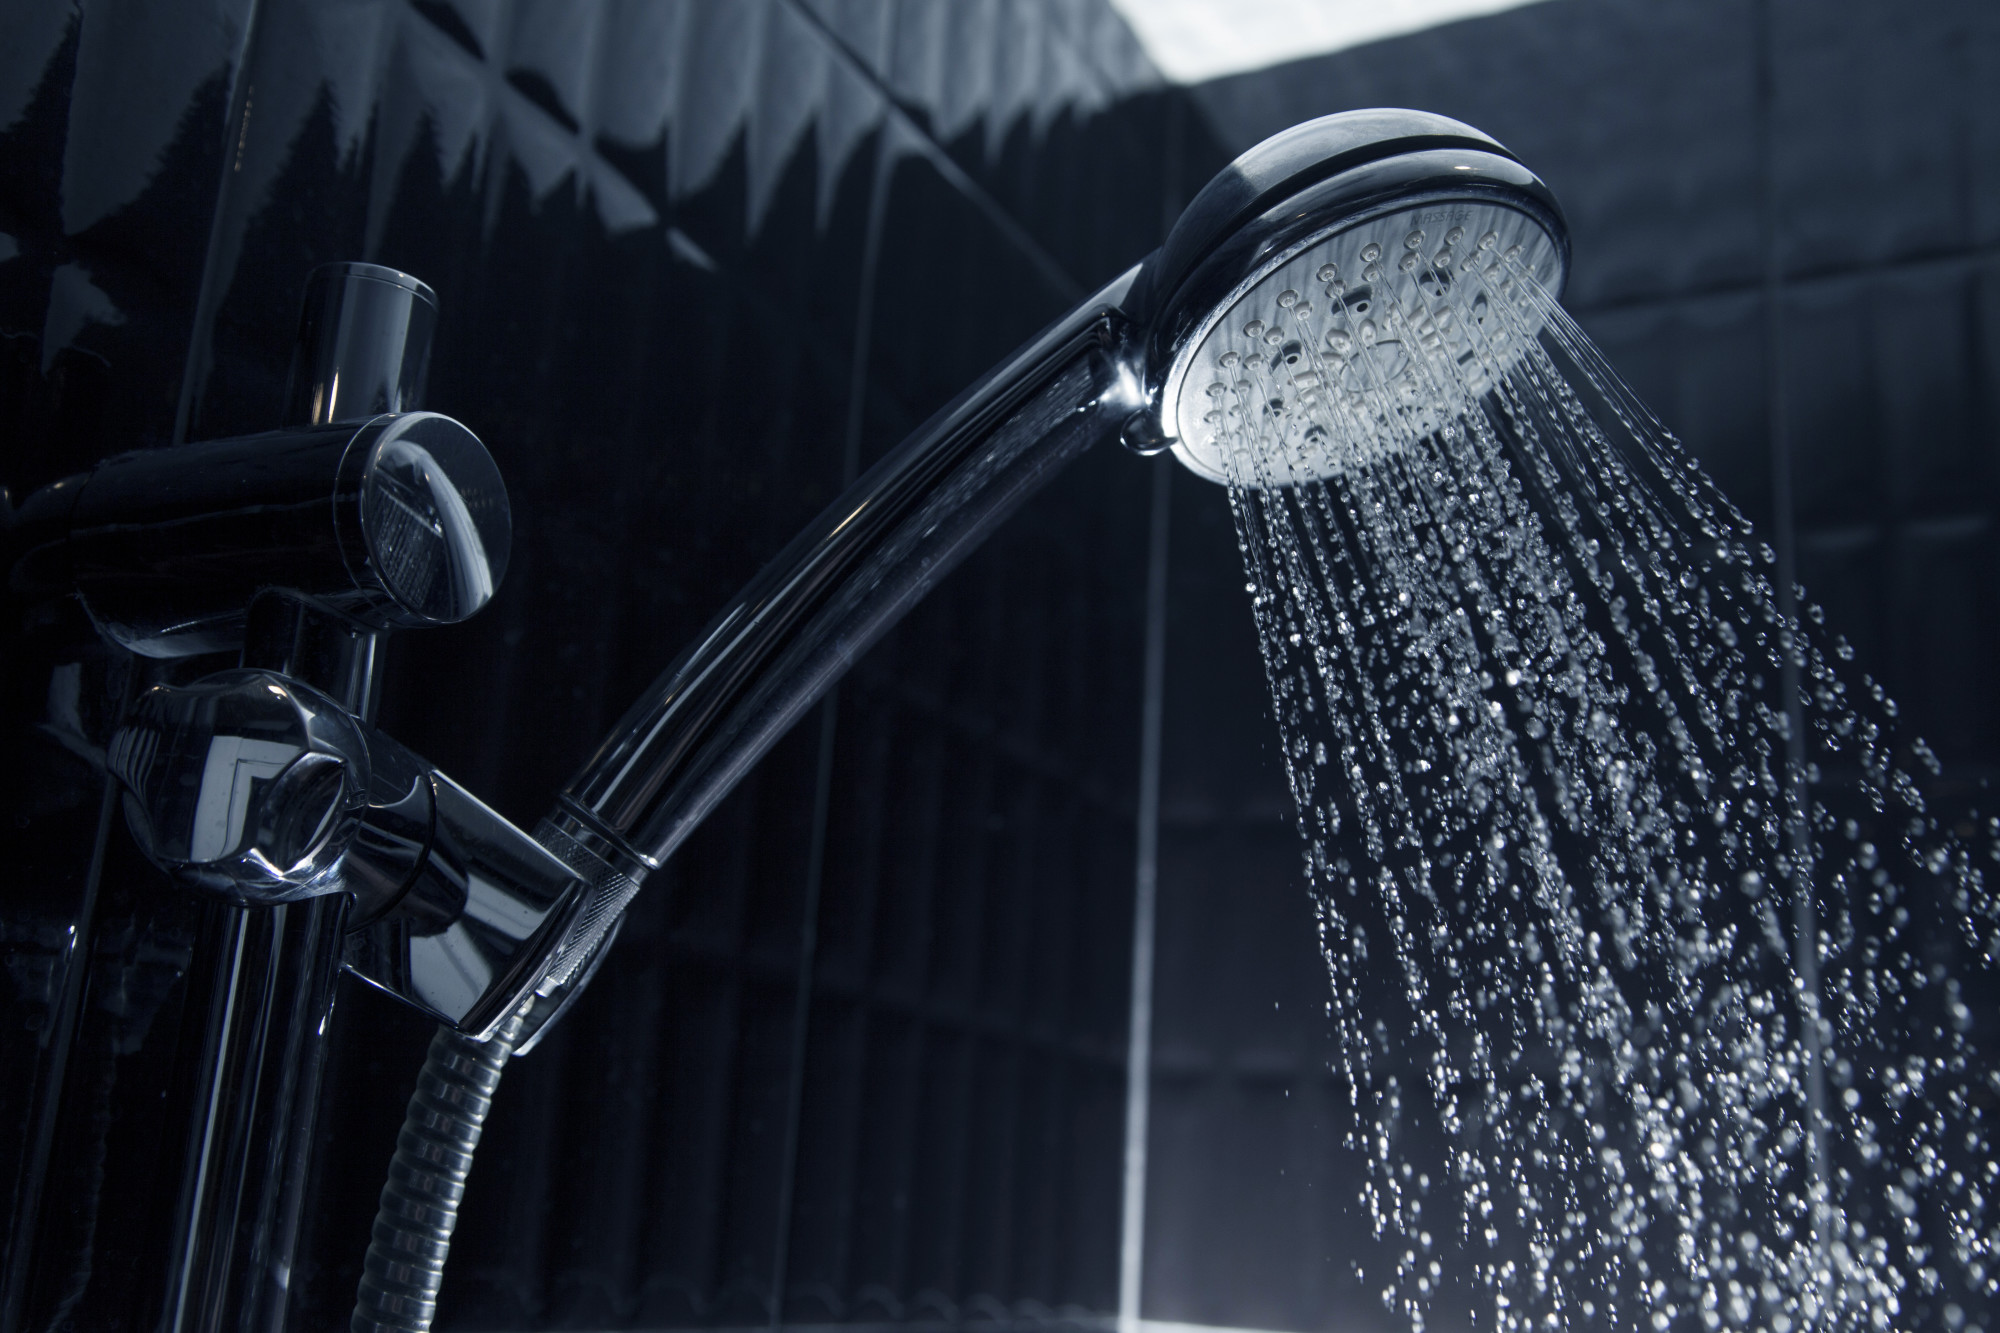 Water Worries: How Often Should a Water Heater Be Serviced?